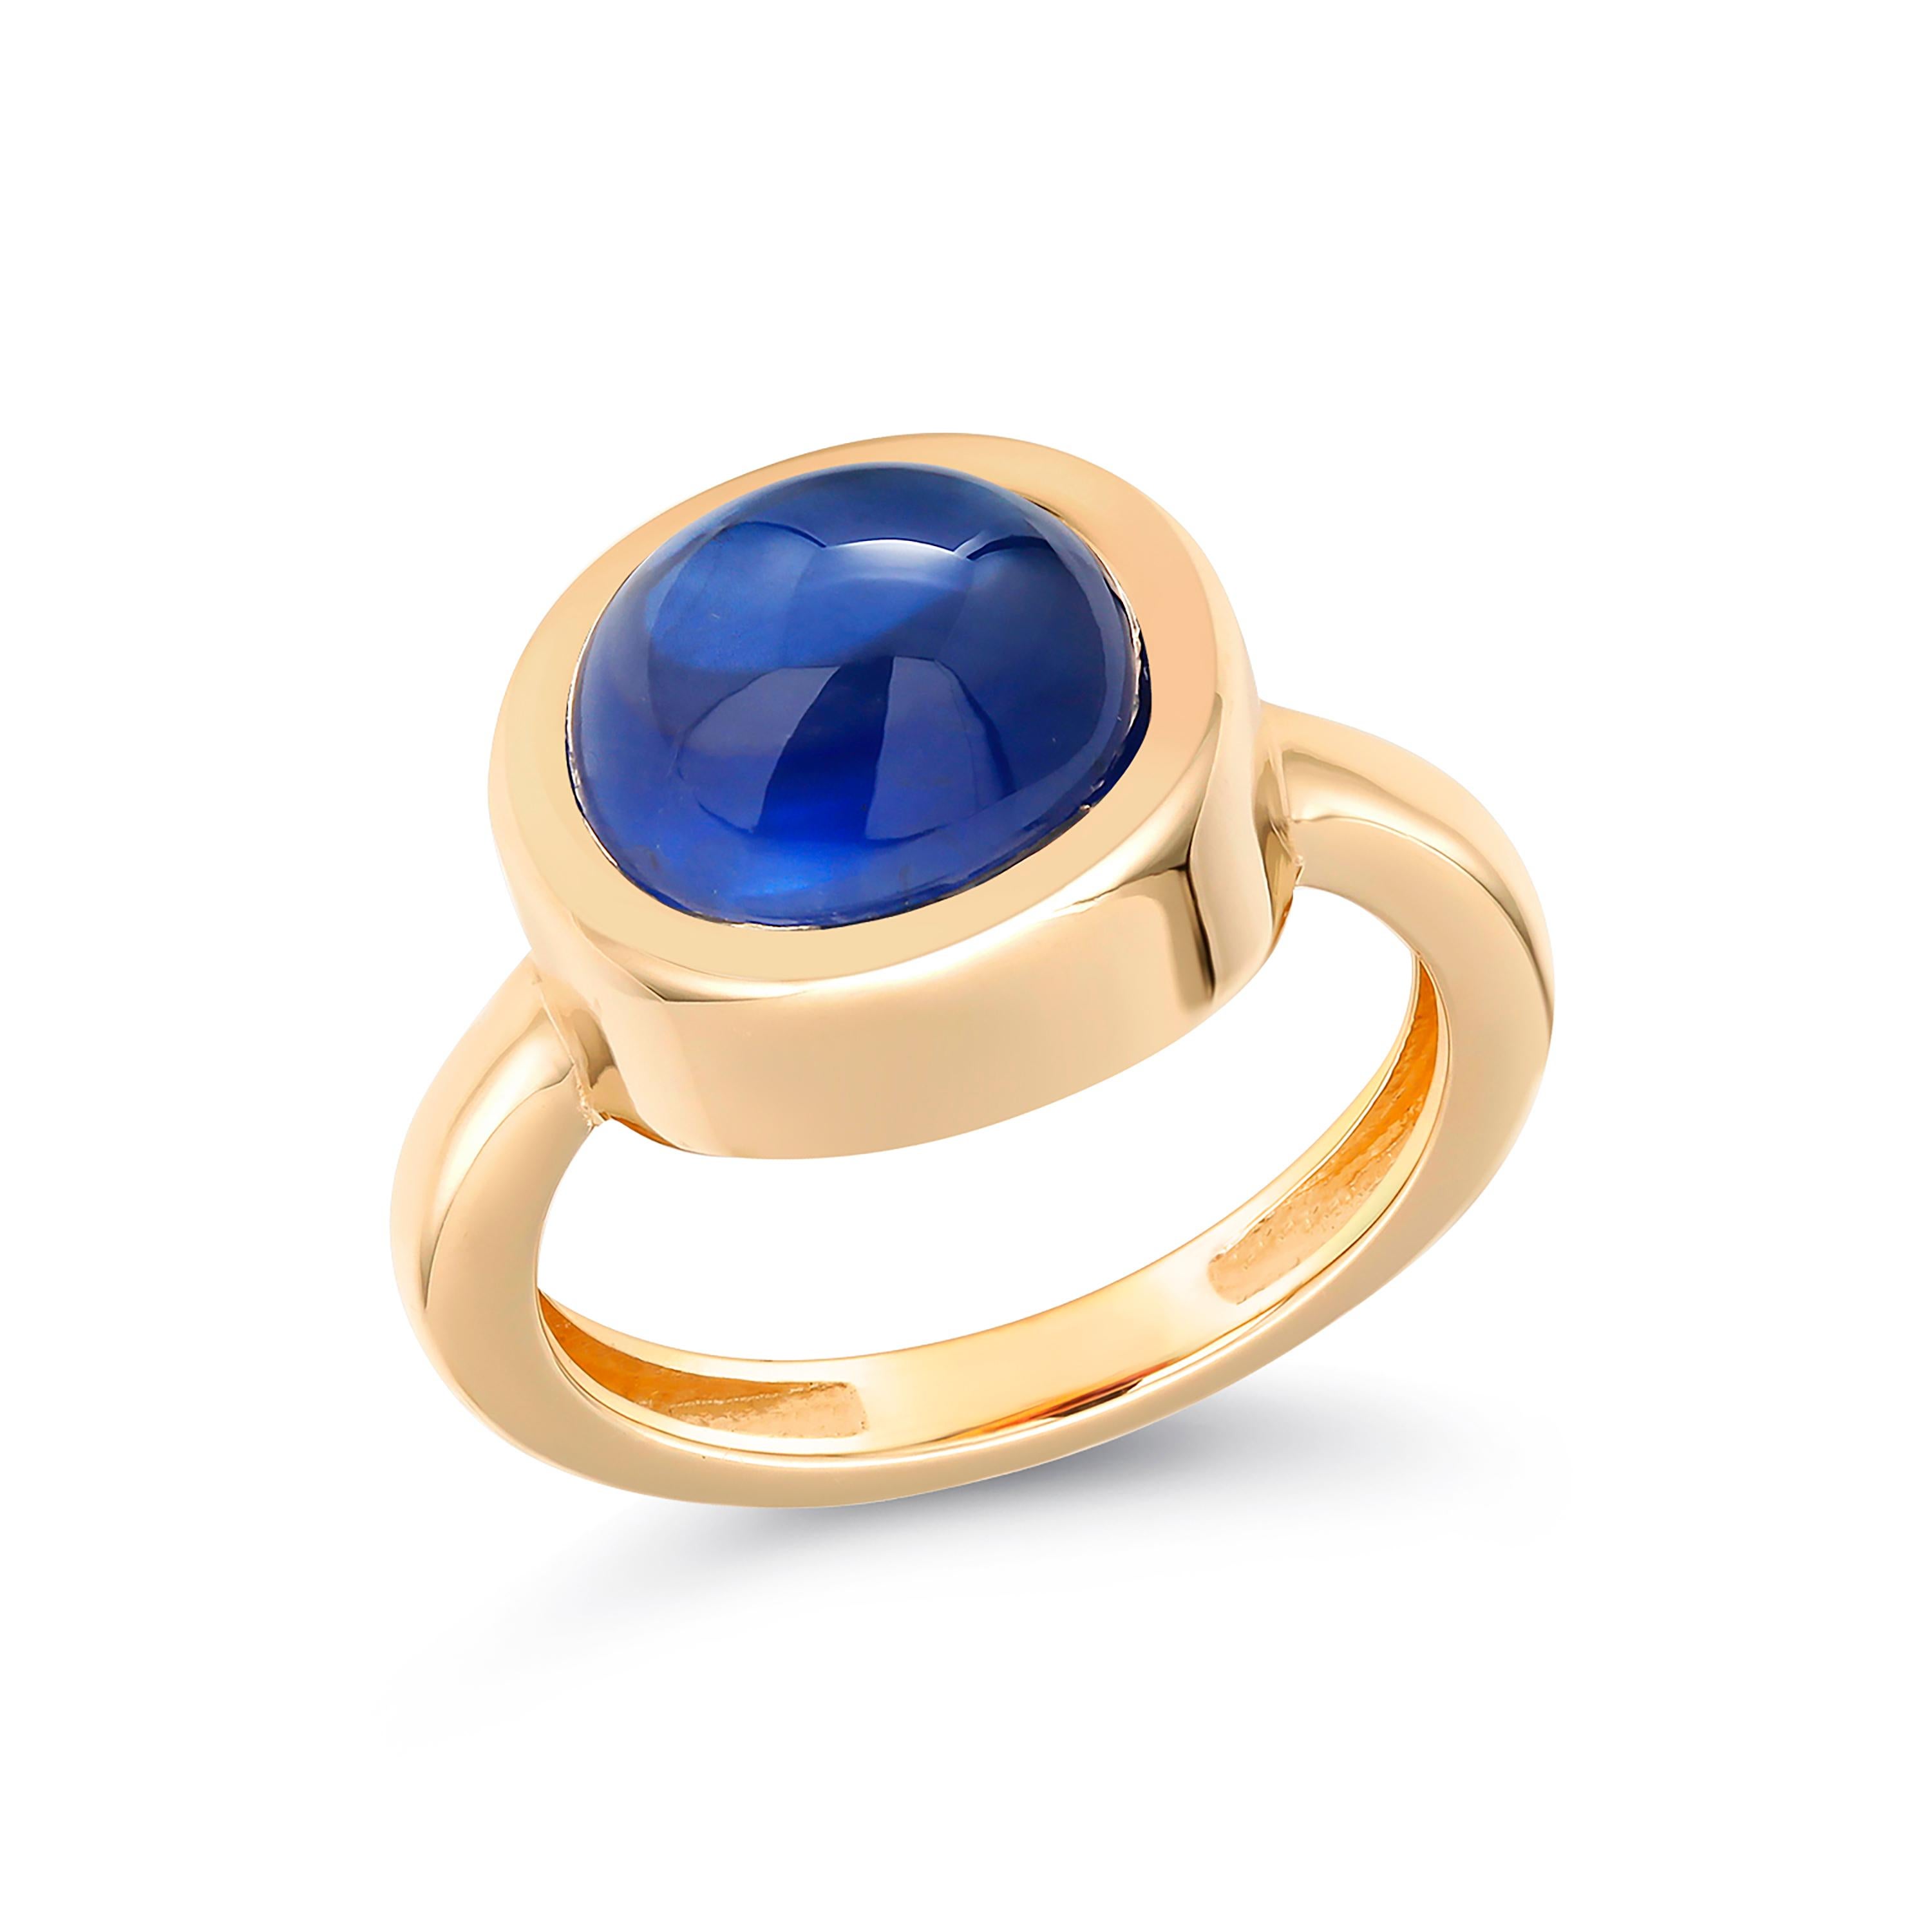 Eighteen karats yellow gold raised bezel dome cocktail ring
Oval-shaped cabochon sapphire weighing 4.40 carats                                                        
Ring size 6 In Stock
The ring can be resized 
Ring Shank measuring 2.75 millimeter